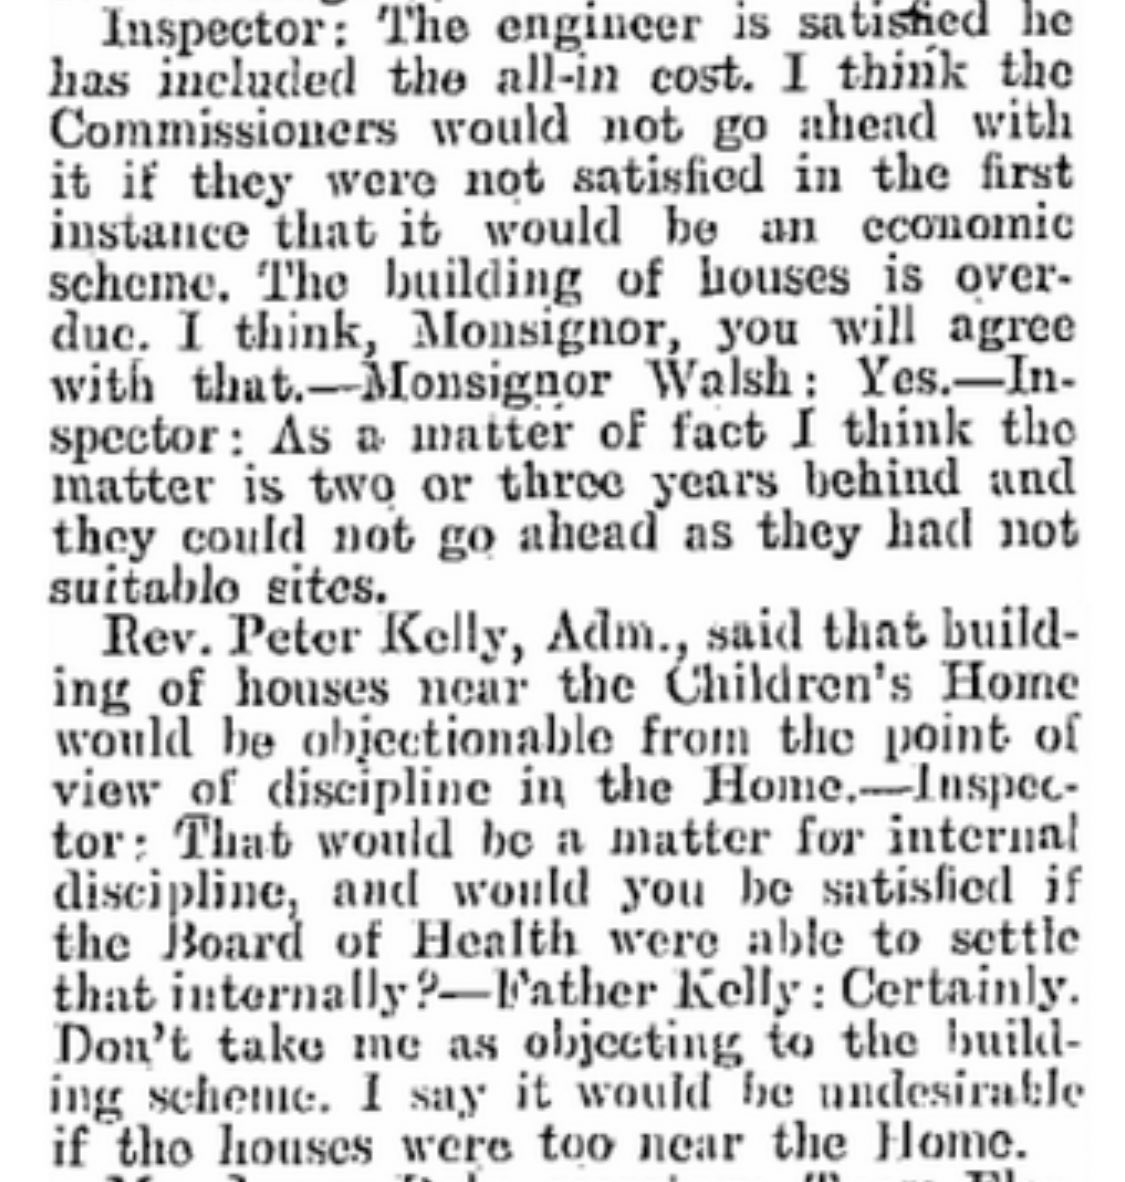 "...houses near the Children’s Home would be objectionable from the point of view of discipline in the Home." - Connacht Sentinel, (24/7/1934) Discipline in “the Home.” This is the language of a prison planner.